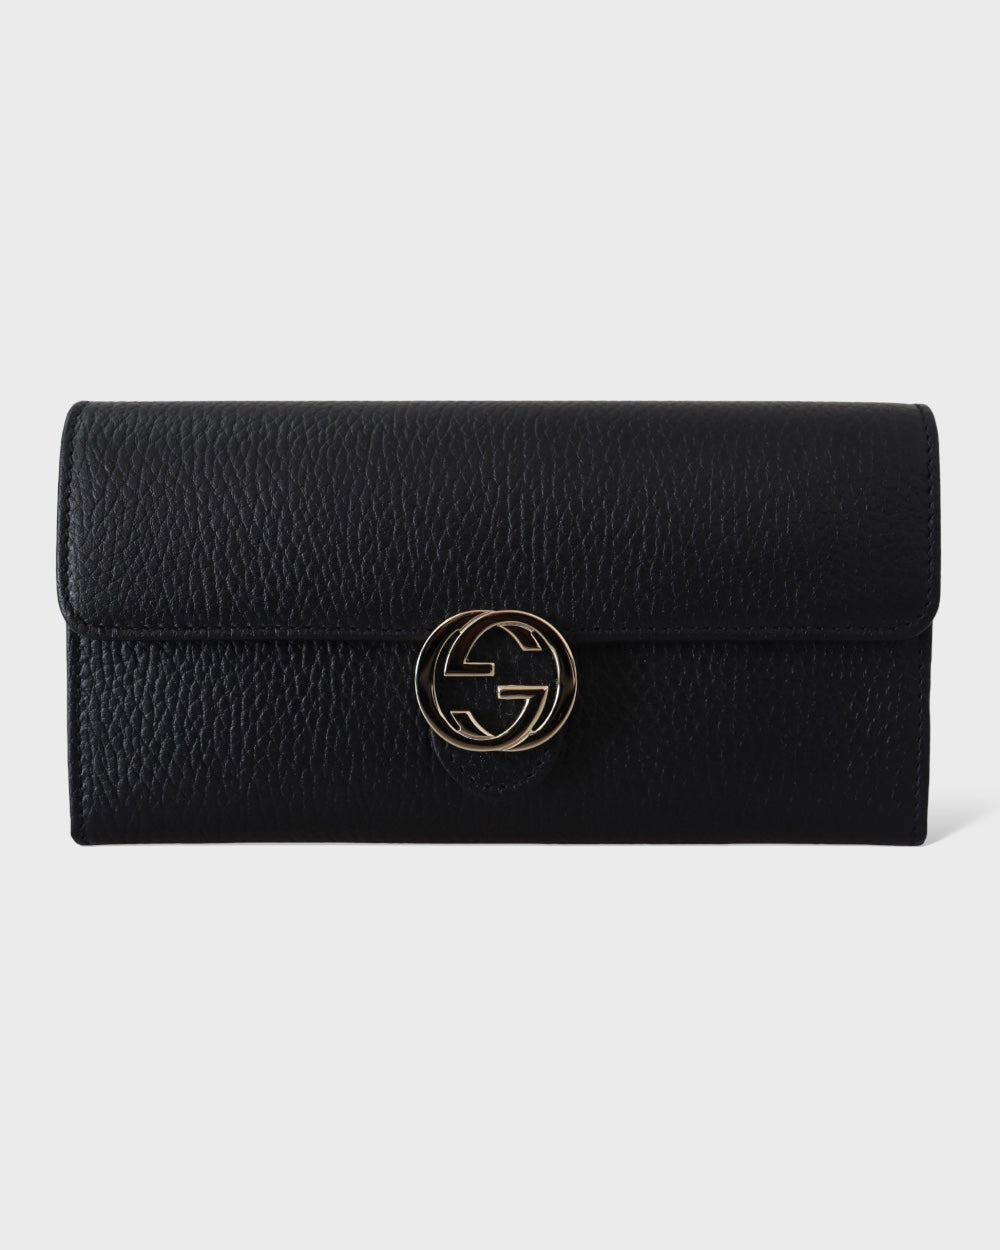 Gucci Black Icon Leather Wallet